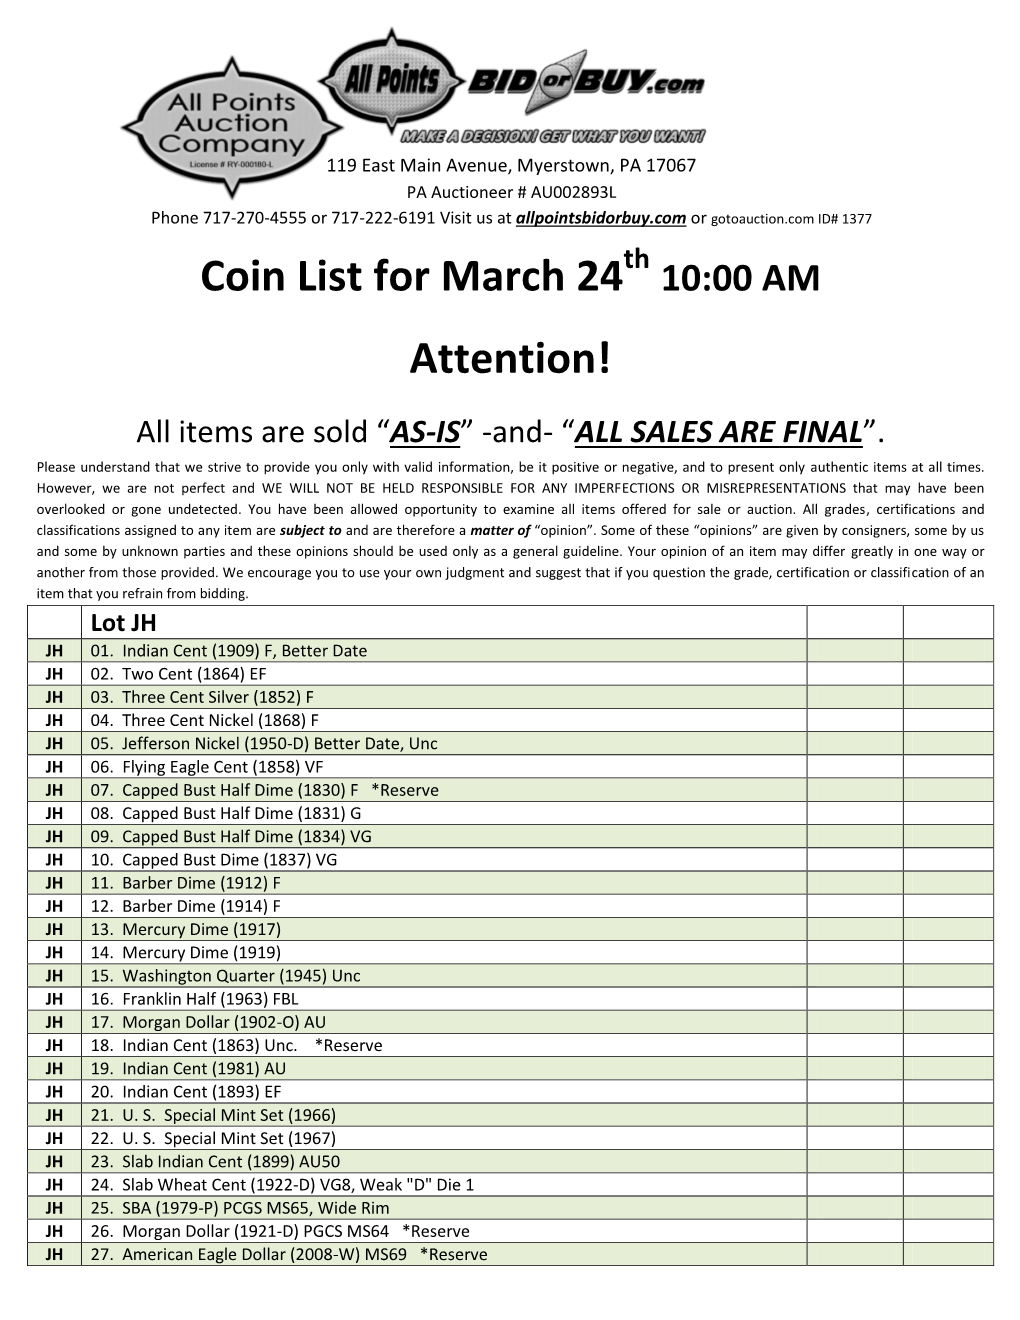 Coin List for March 24 Attention!